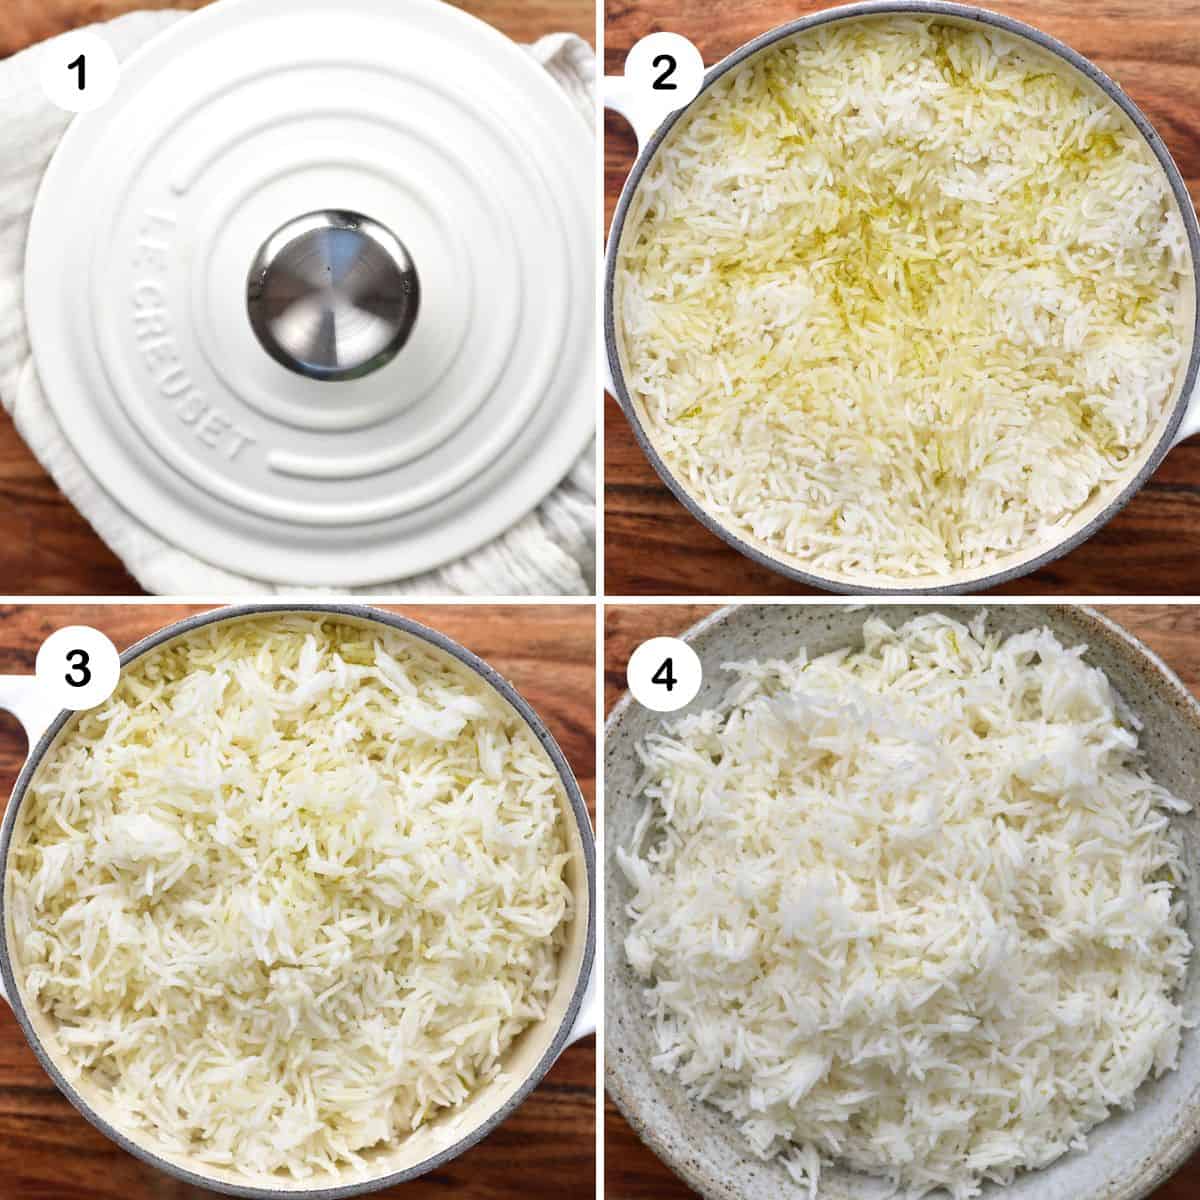 Steps for steaming and fluffing rice